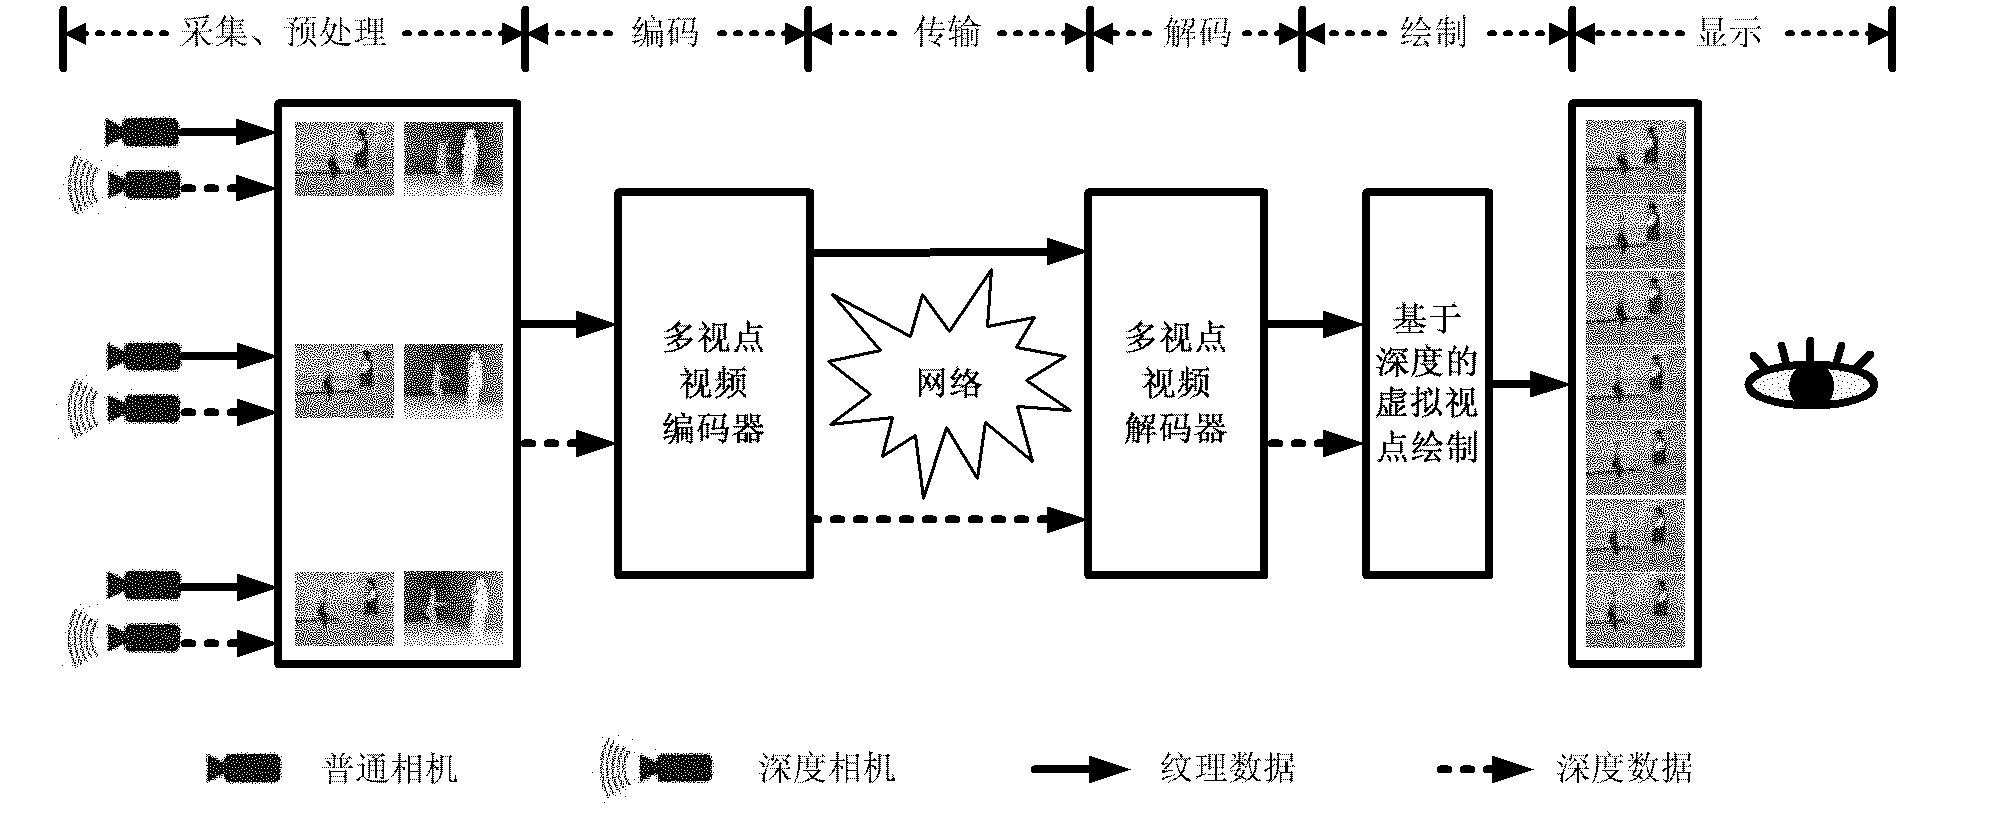 Multi-viewpoint video signal coding method based on vision